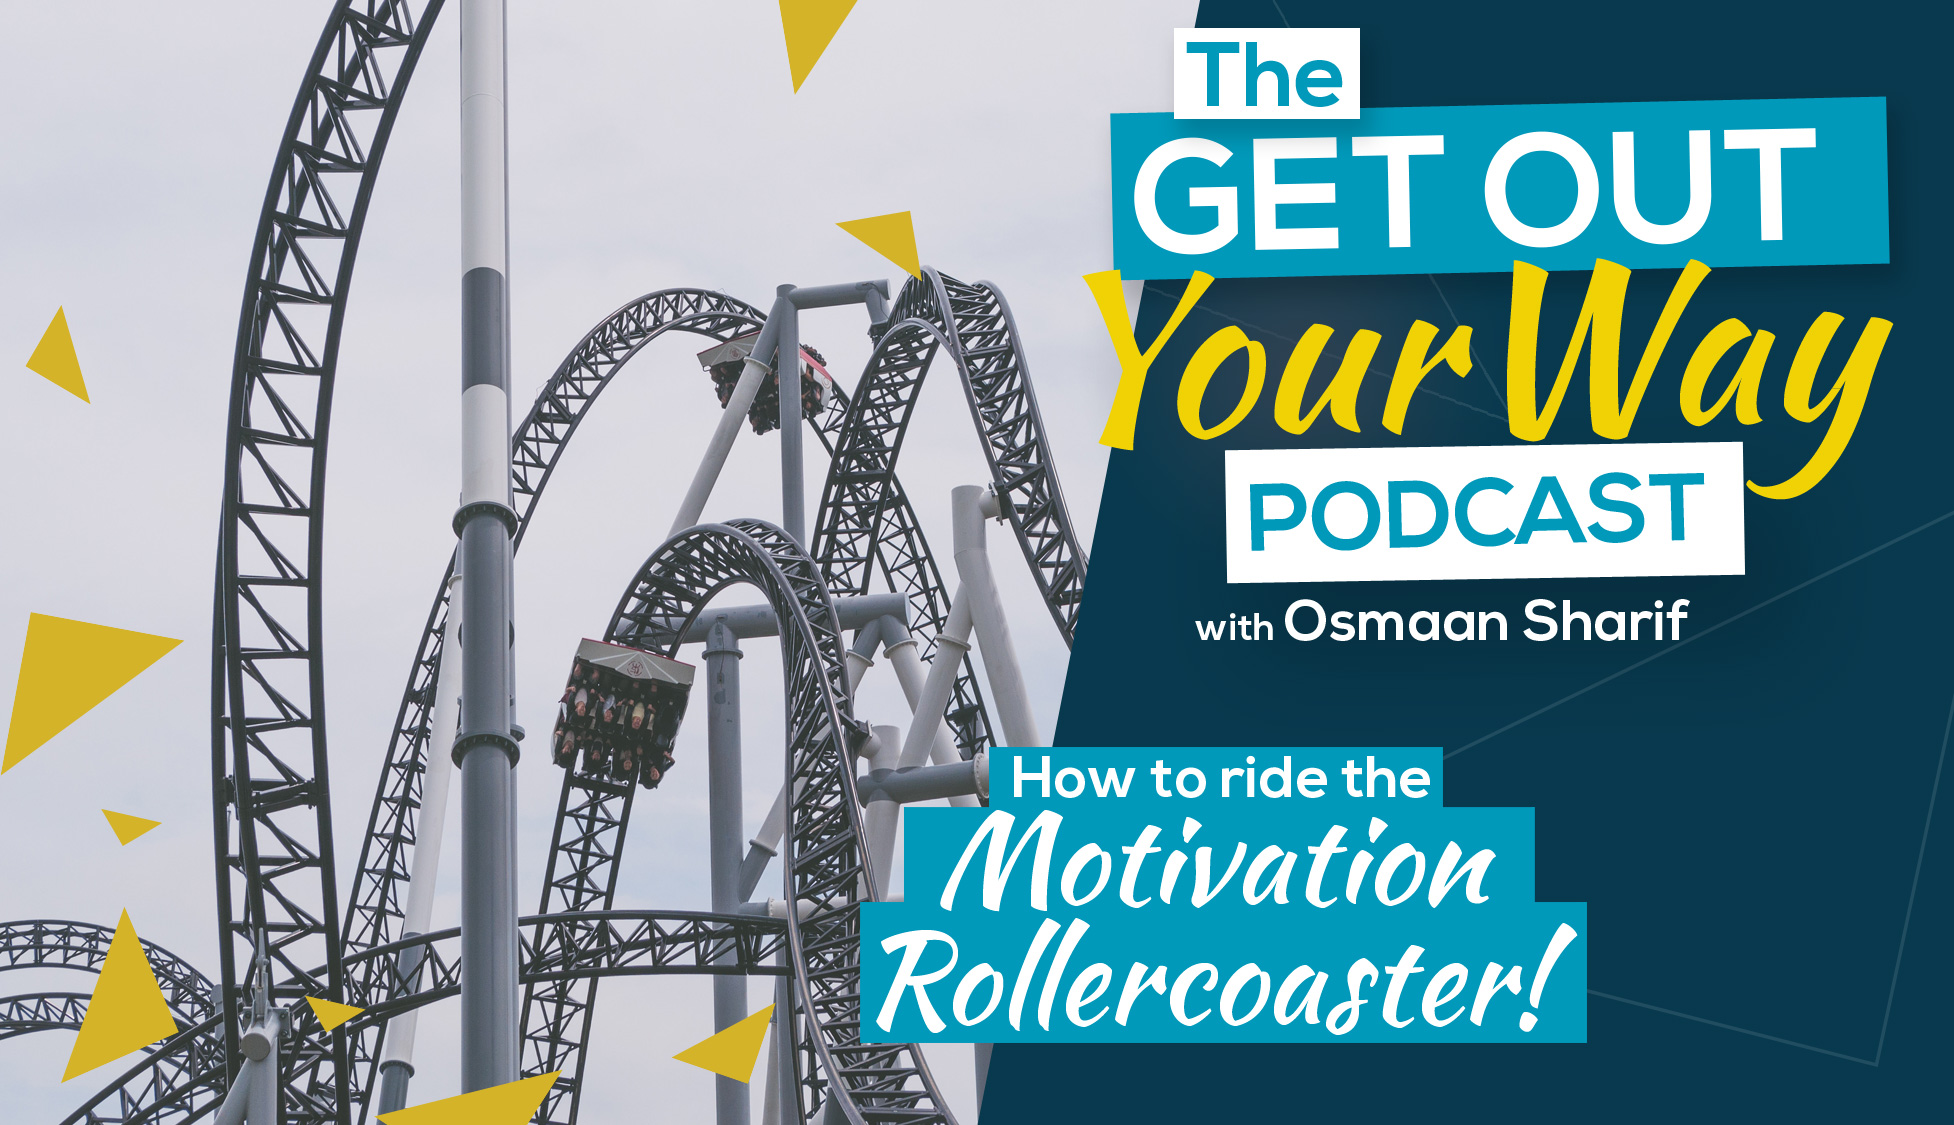 How to ride the motivation rollercoaster